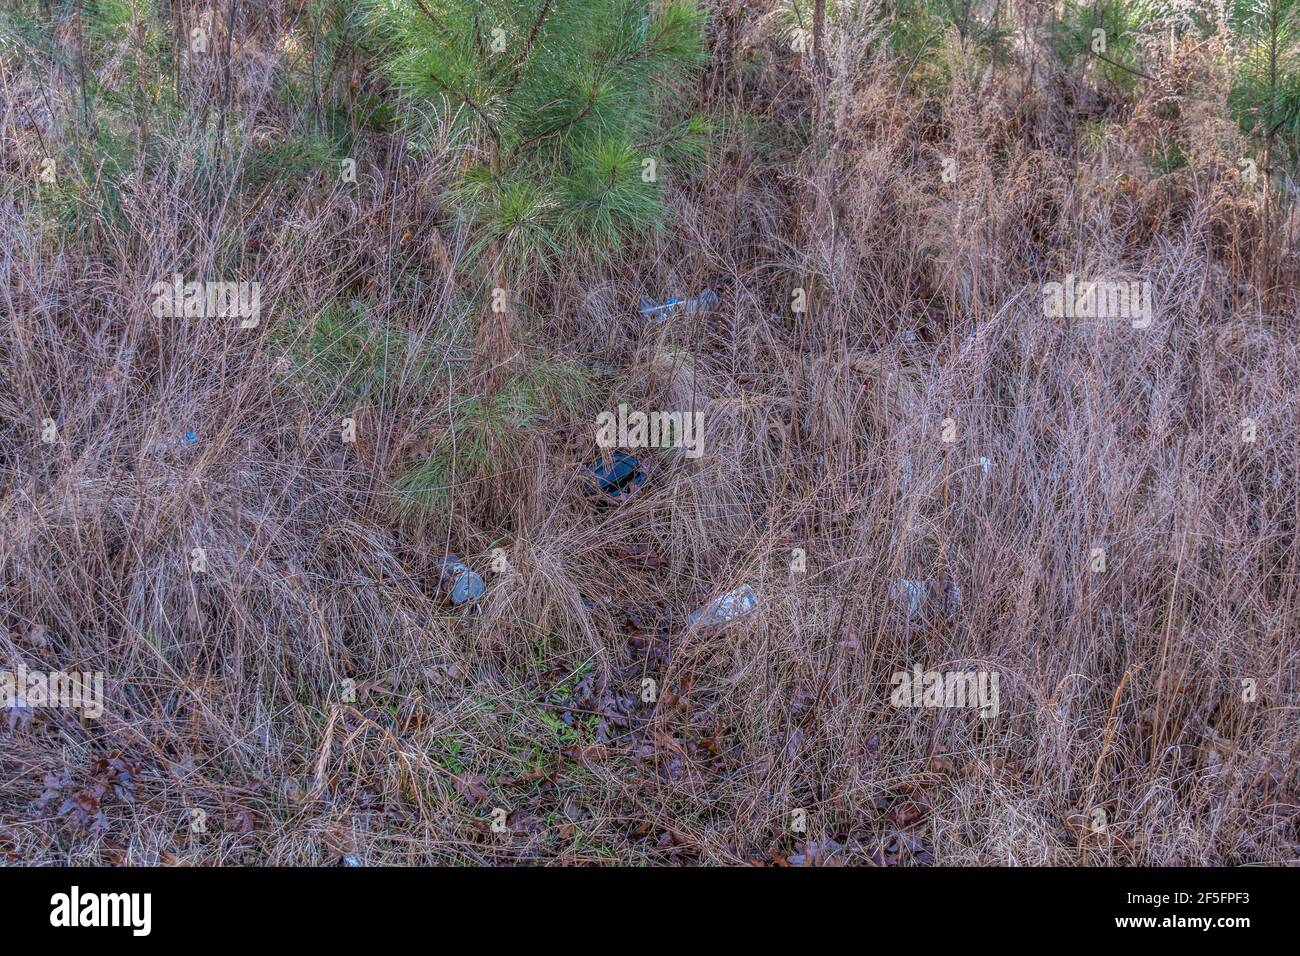 Lots of plastic styrofoam cups with lids and straws and aluminum cans and food wrappers tossed in the weeds and tall grasses on the ground alongside t Stock Photo